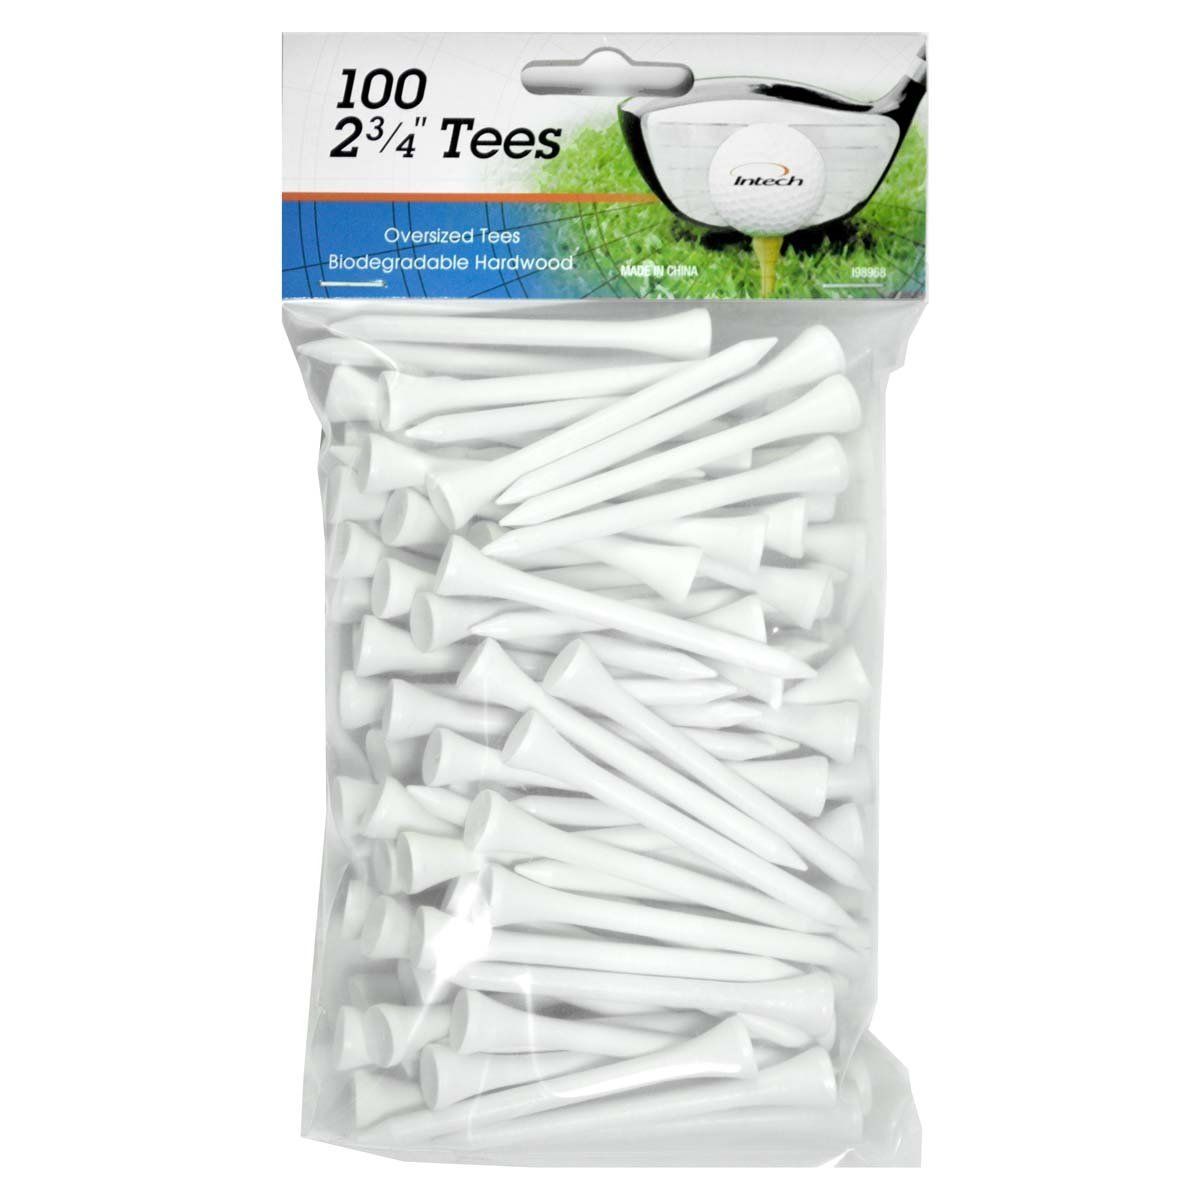 Intech 2 3/4-Inch Golf Tees (Pack of 100)